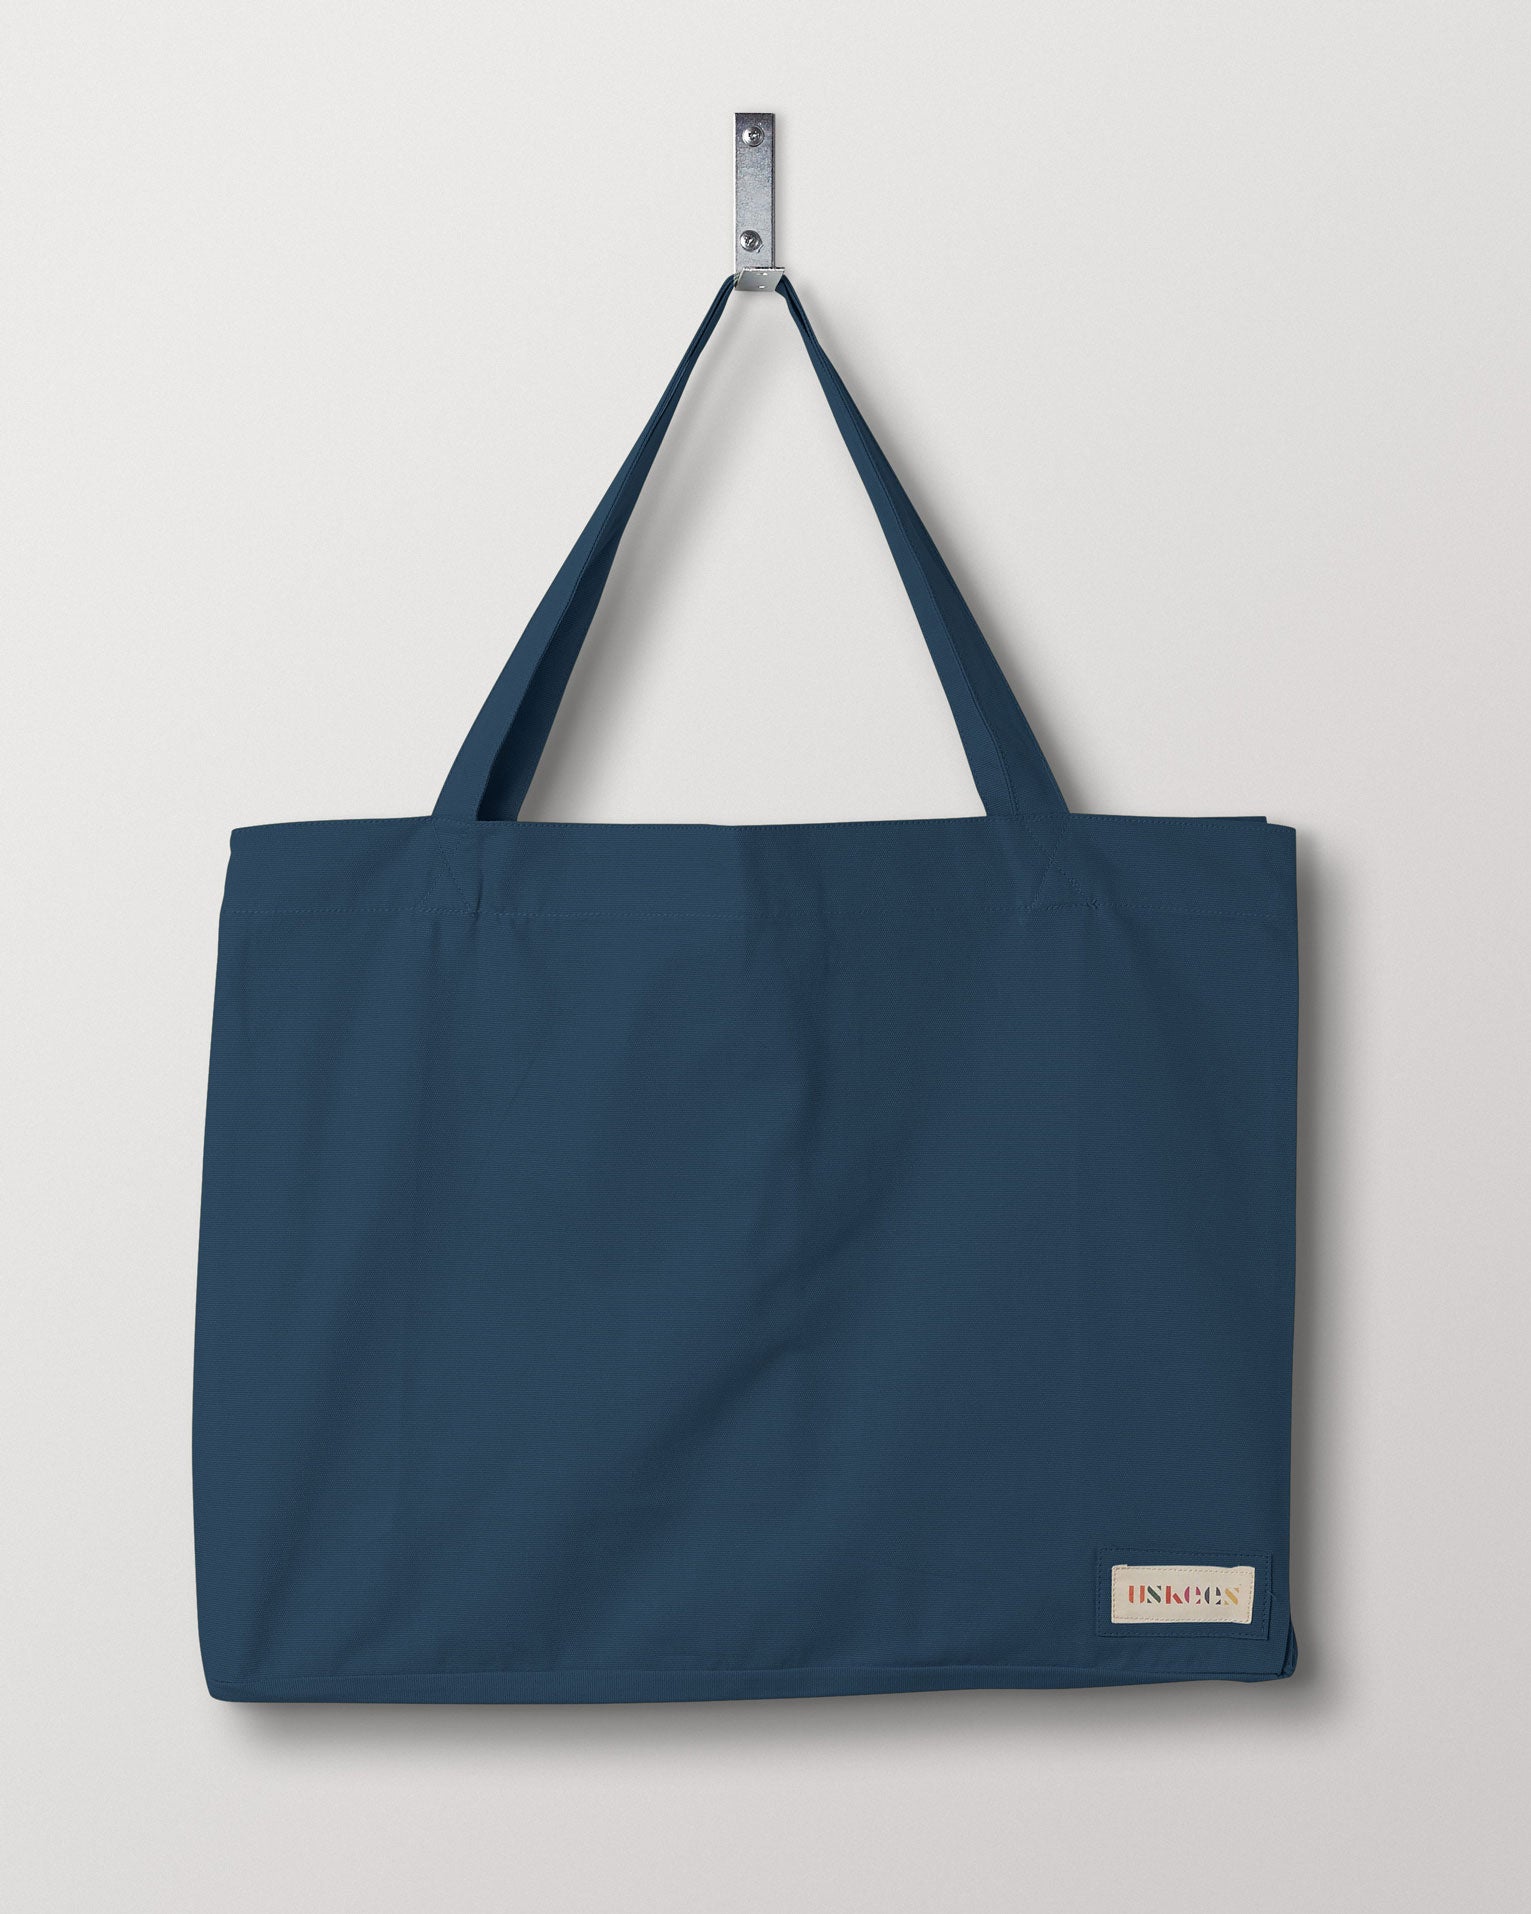 Full front hanging shot of Uskees #4001 large blue tote bag, showing double handles and Uskees woven logo.